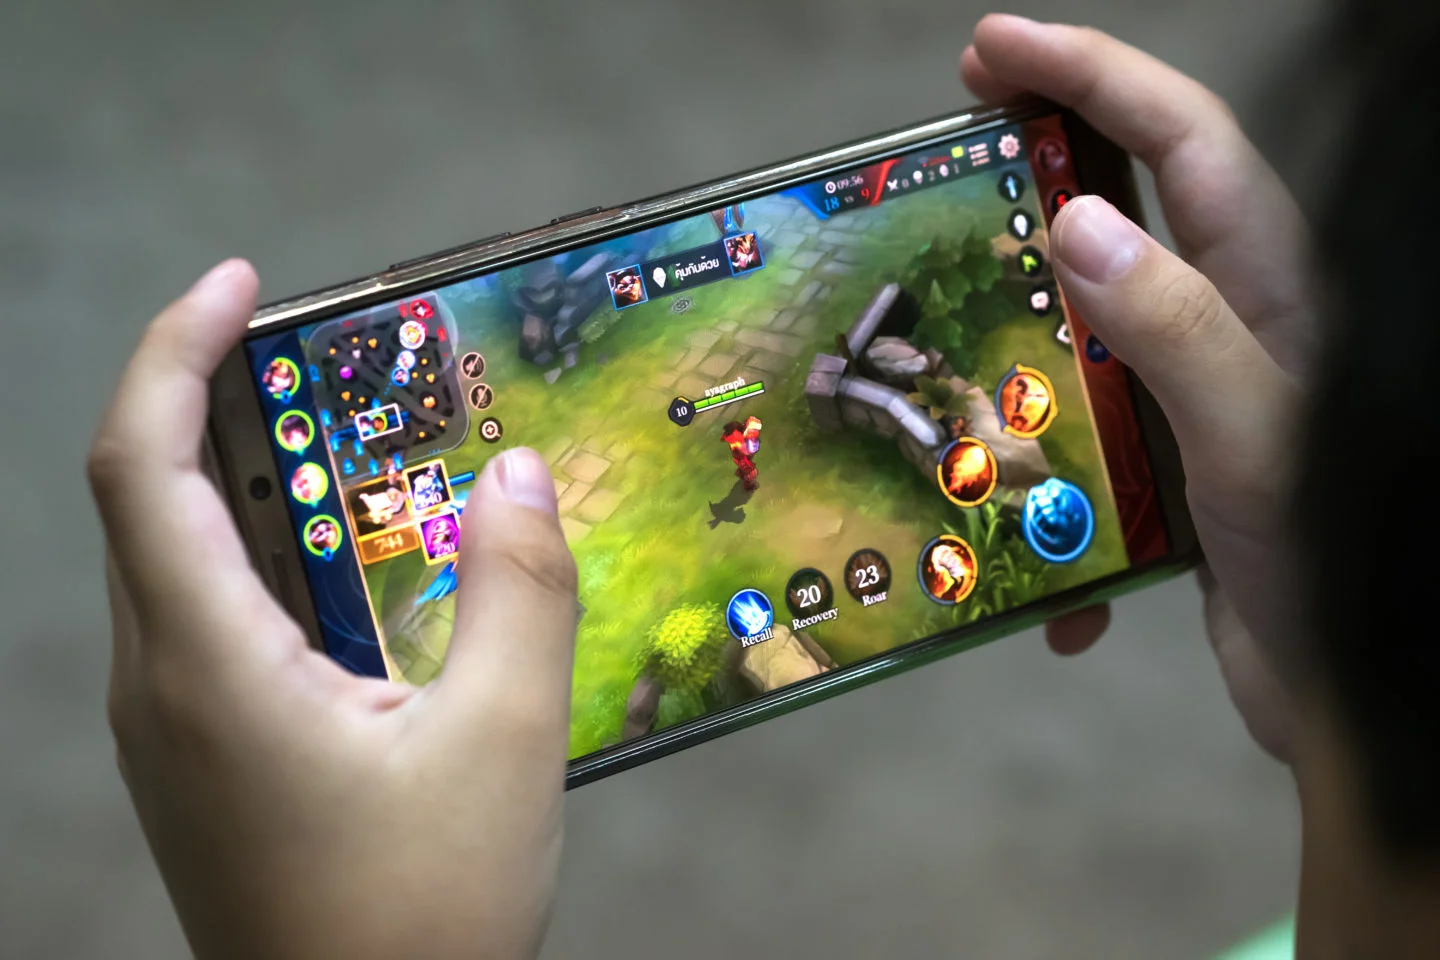 The mobile gaming market generates more money than consoles and PCs combined